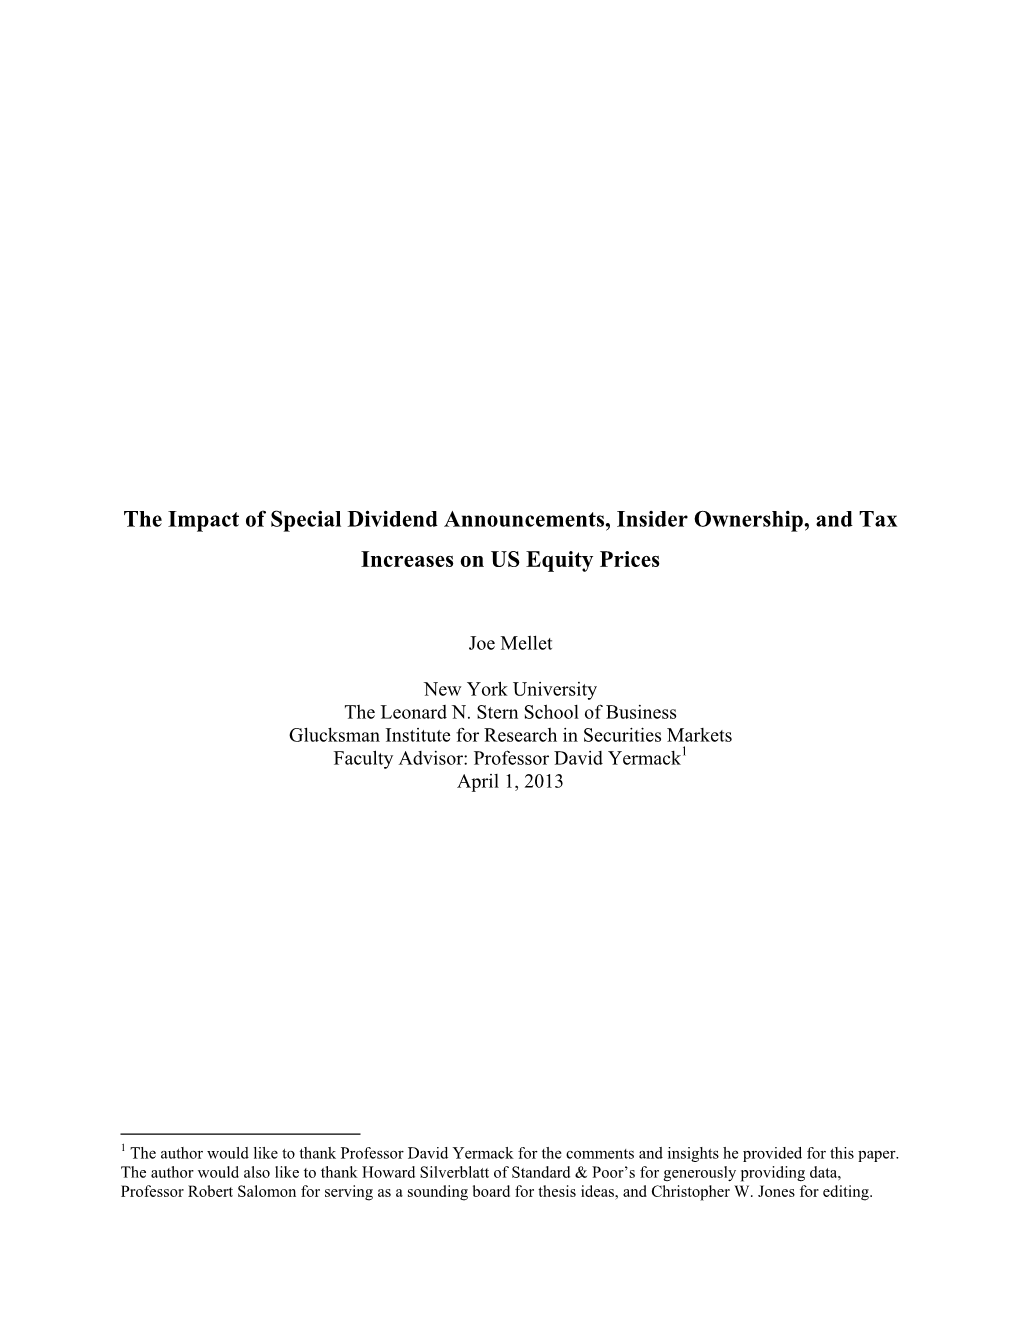 The Impact of Special Dividend Announcements, Insider Ownership, and Tax Increases on US Equity Prices